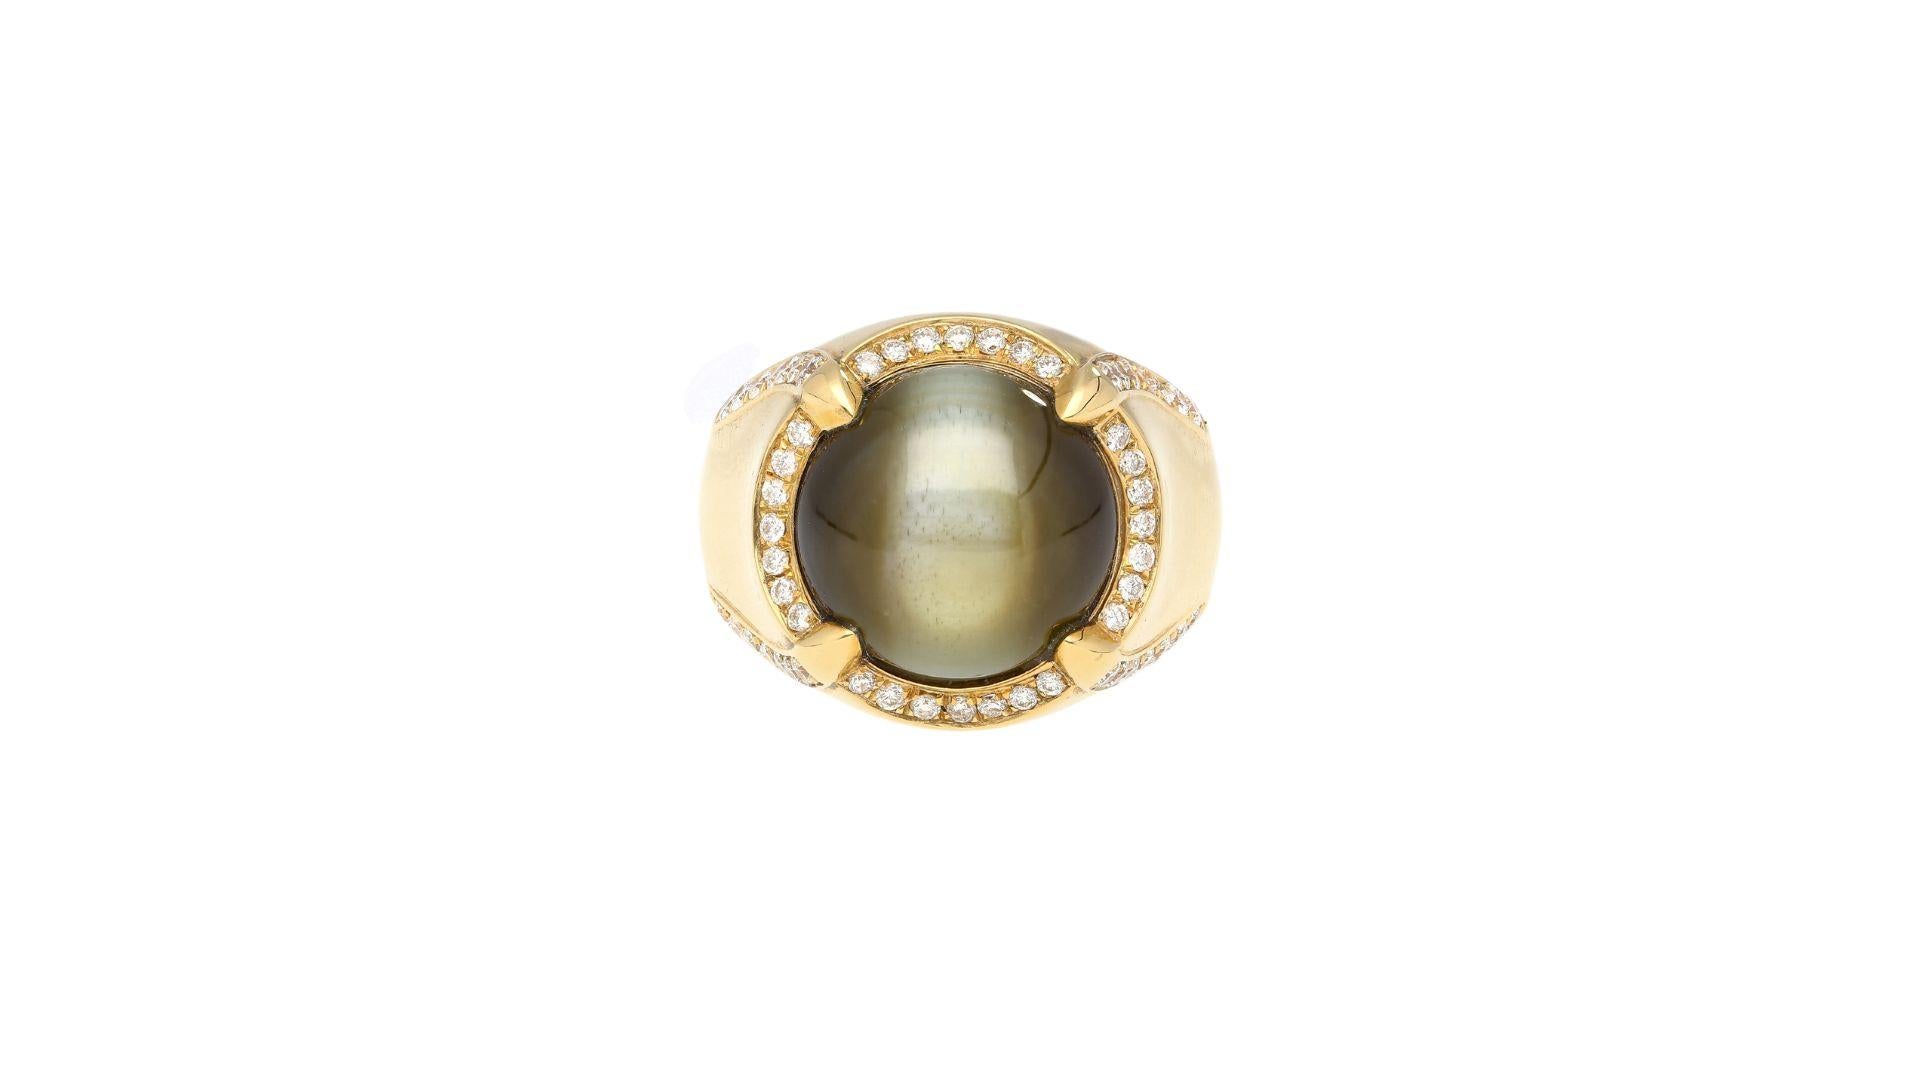 GRS Certified Chrysoberyl Cat's Eye men's ring in 18k solid yellow gold elevated setting. The center stone is a natural mined Chrysoberyl Cat's Eye, cabochon cut and displaying a wide and prominent chatoyancy (star) effect. A gemstone of that carat